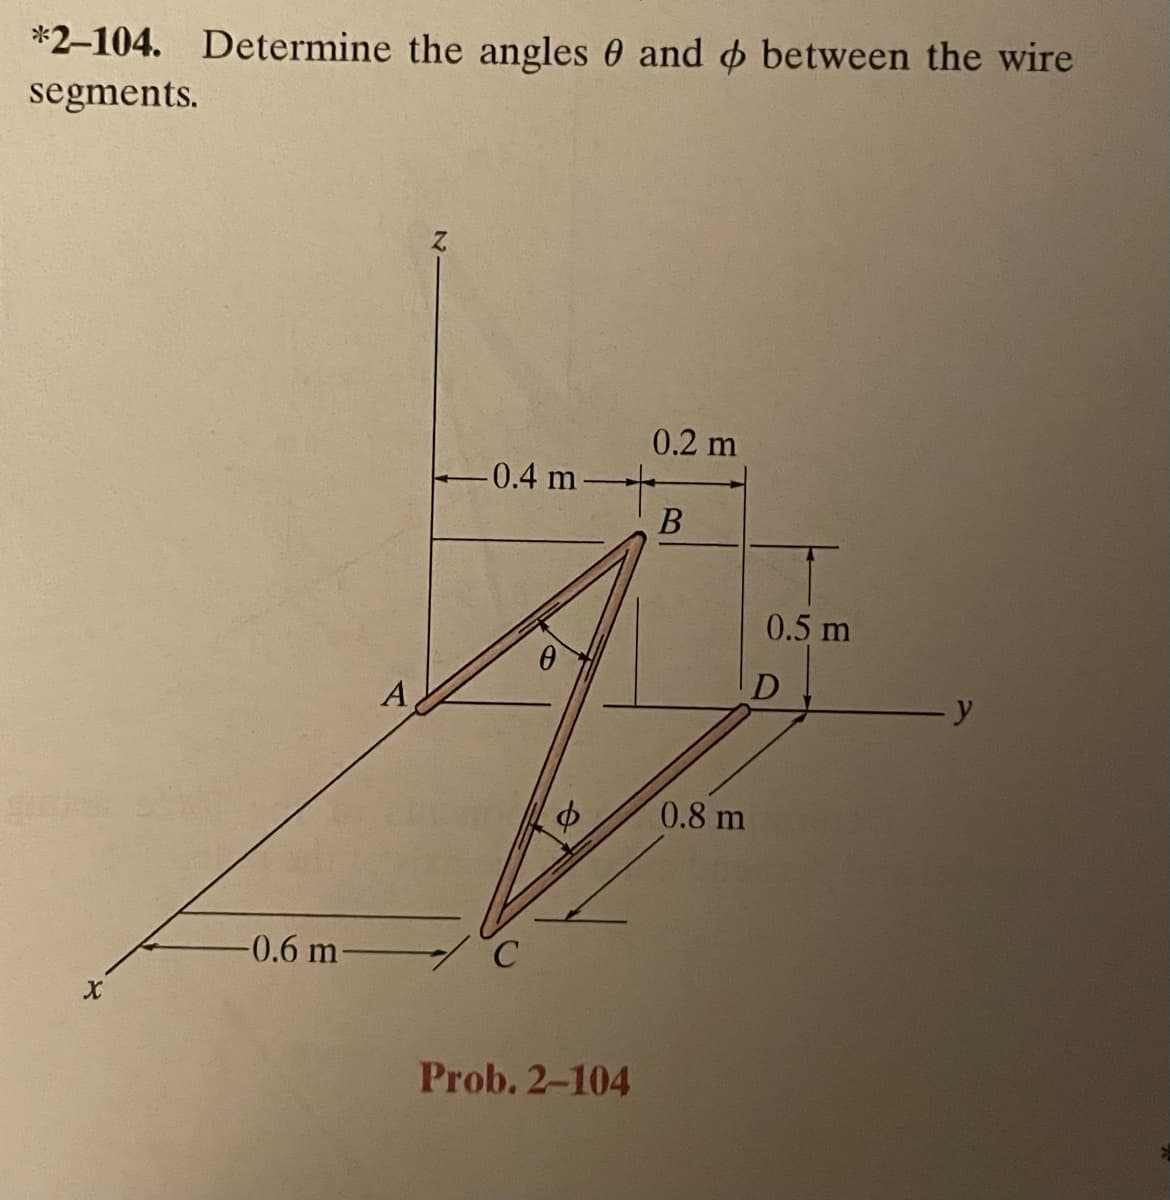 *2-104. Determine the angles and between the wire
segments.
X
-0.6 m-
A
-0.4 m
C
0
Prob. 2-104
0.2 m
B
0.8 m
0.5 m
D
y